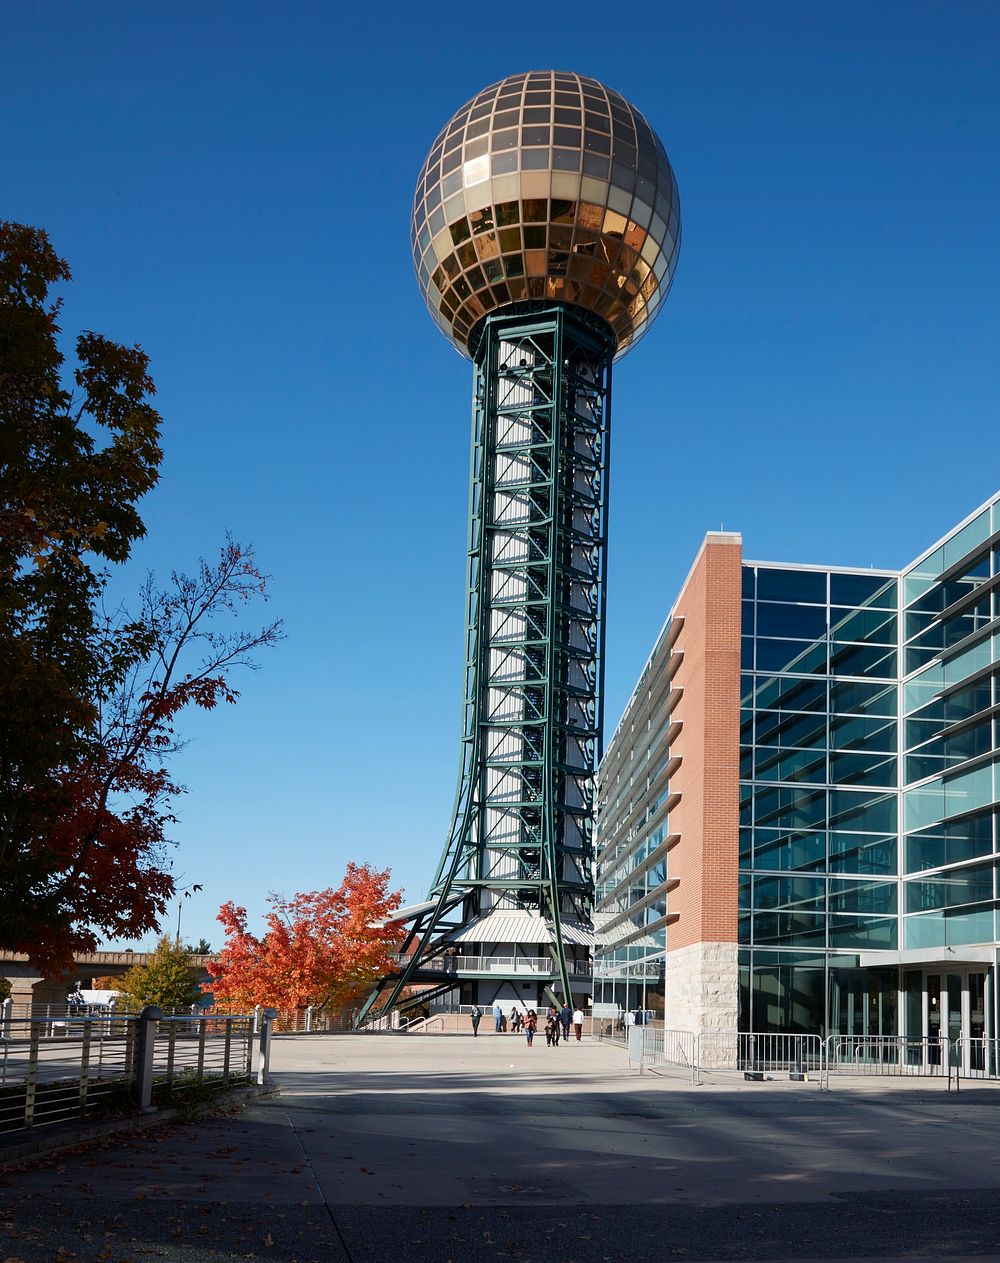                         View of the 26-story-tall Sunsphere, the signature landmark of the 1982 World's Fair, and the…